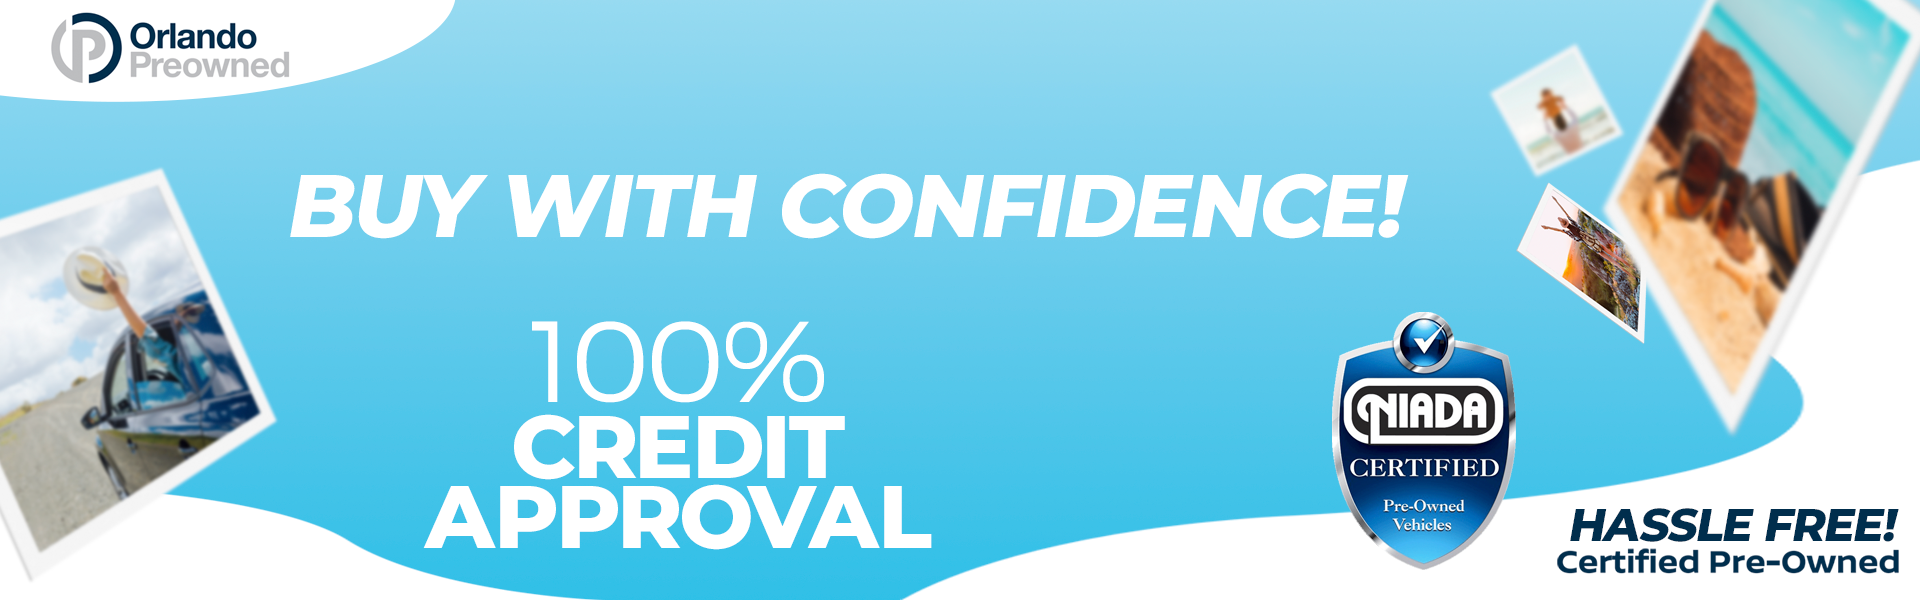 100% Credit Approval on used car loans at Orlando Pre-Owned